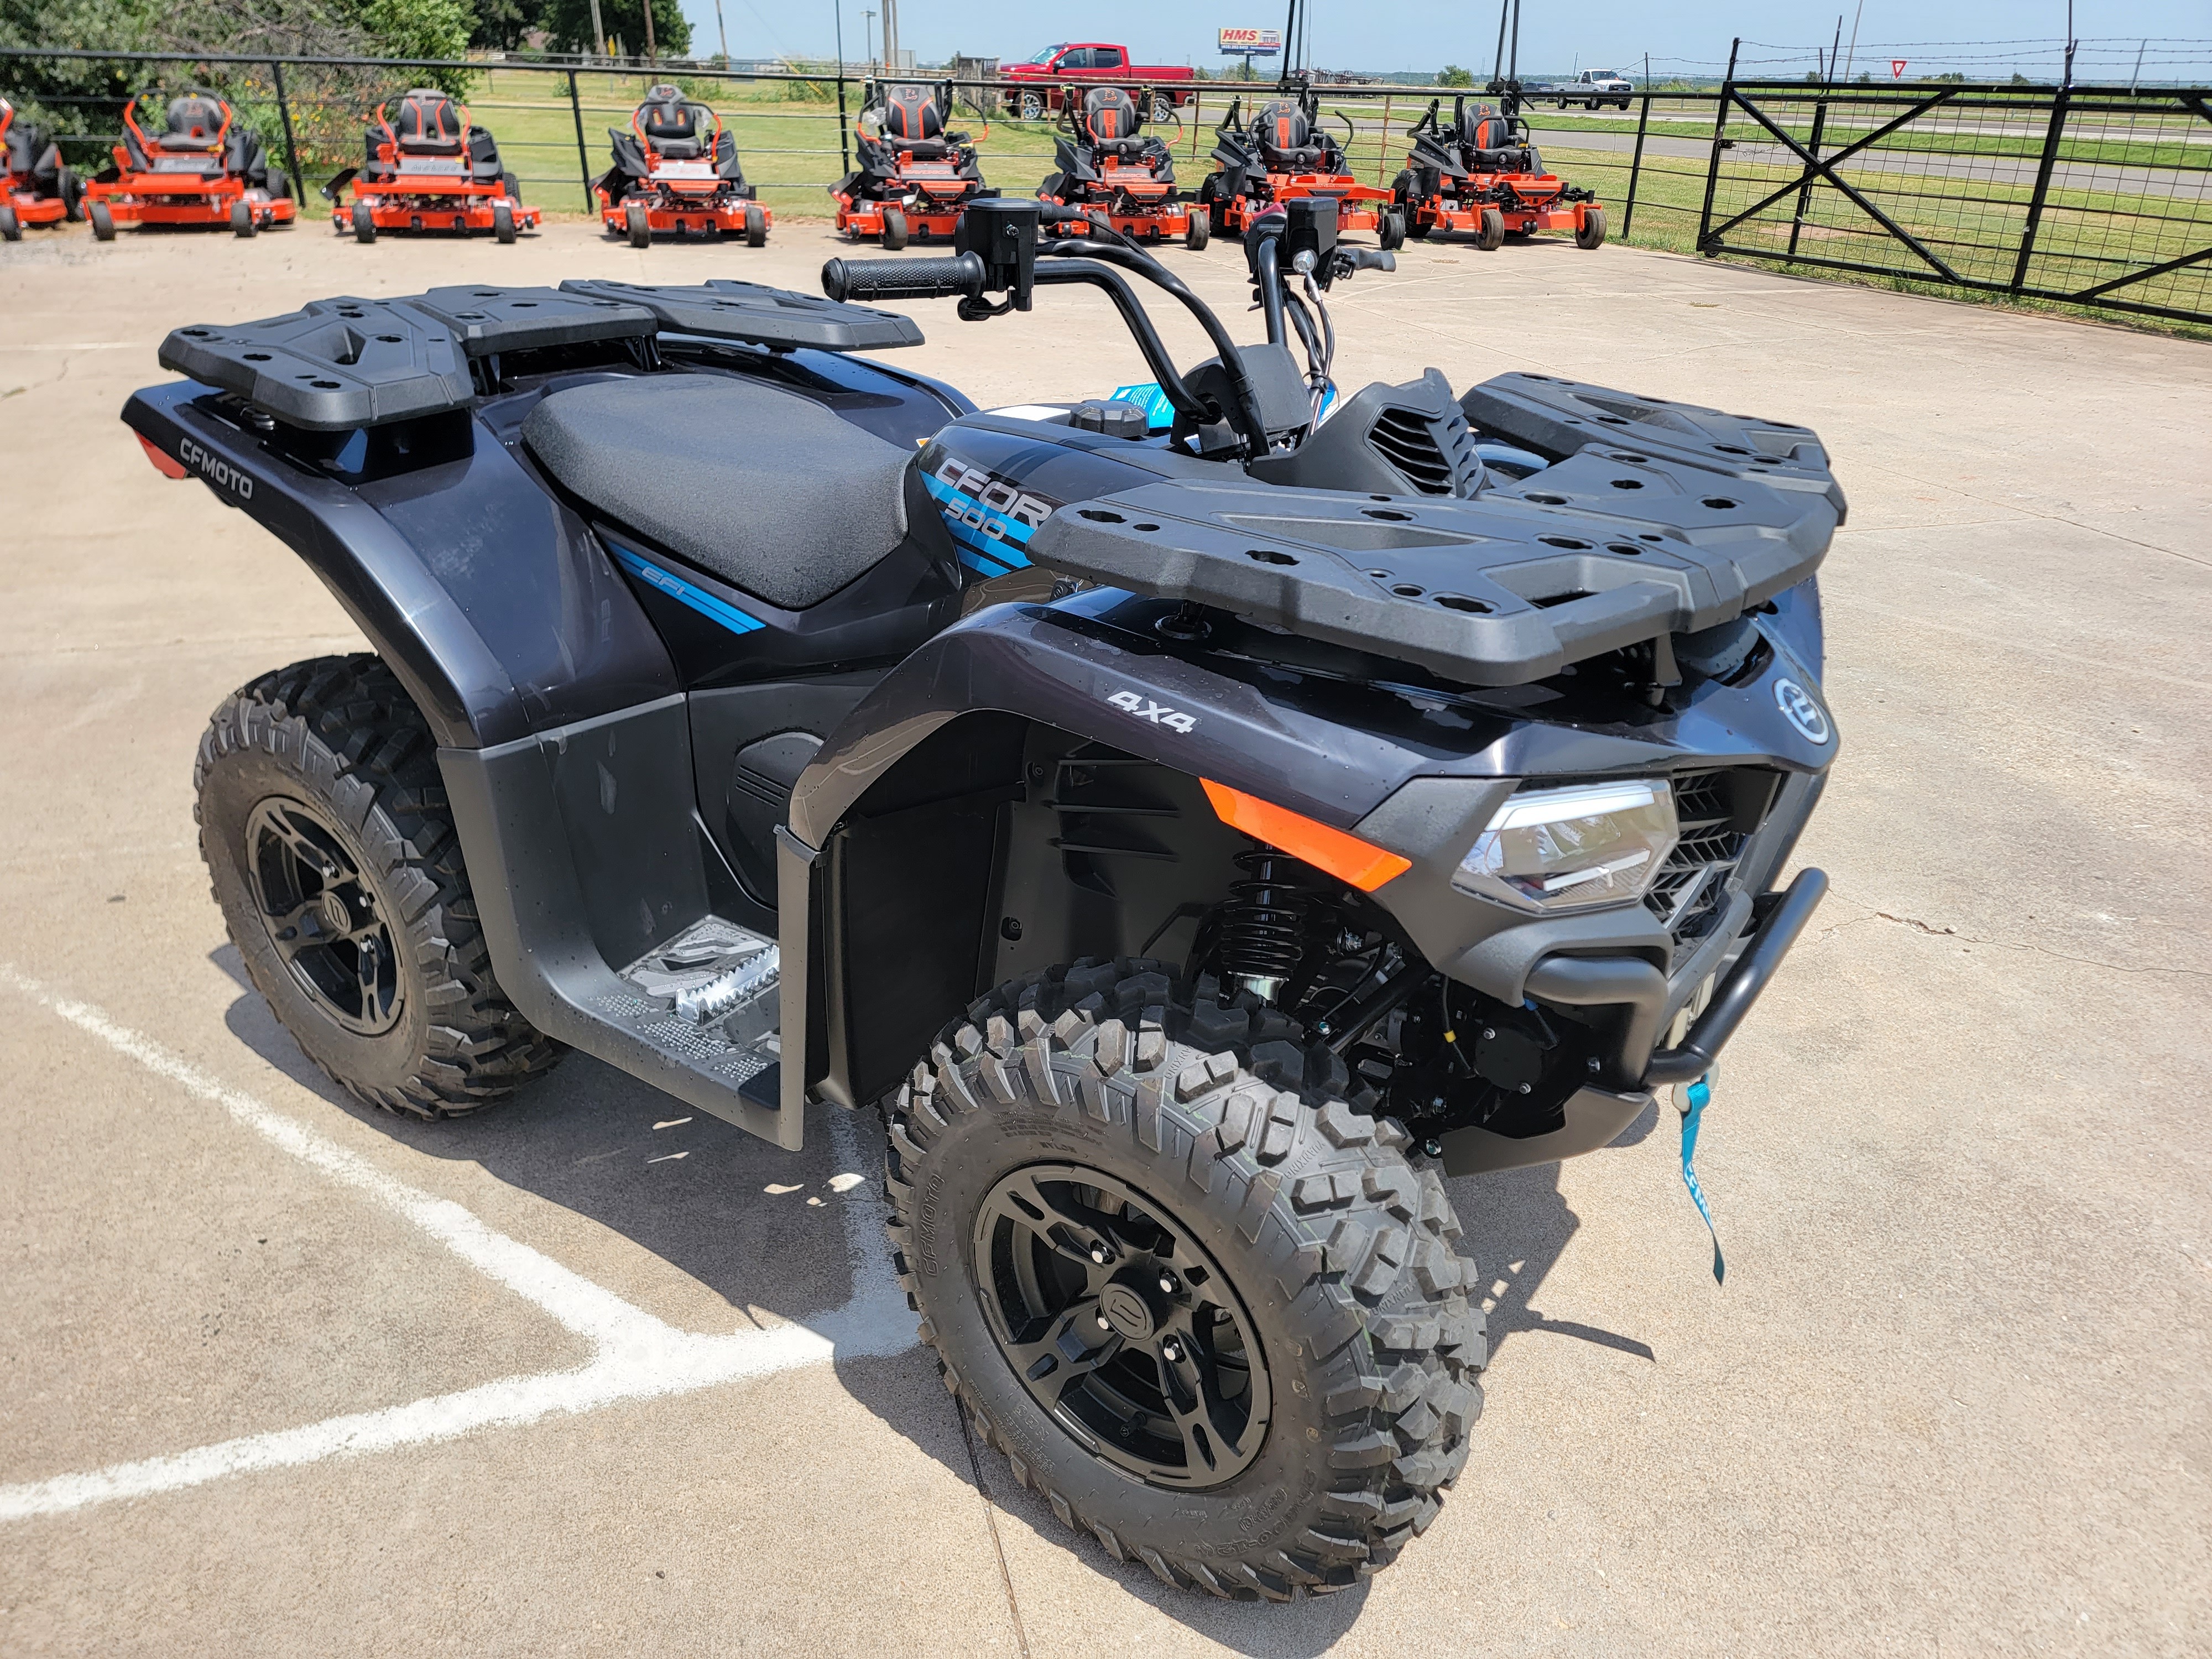 2023 CFMOTO CFORCE 500 at Xtreme Outdoor Equipment